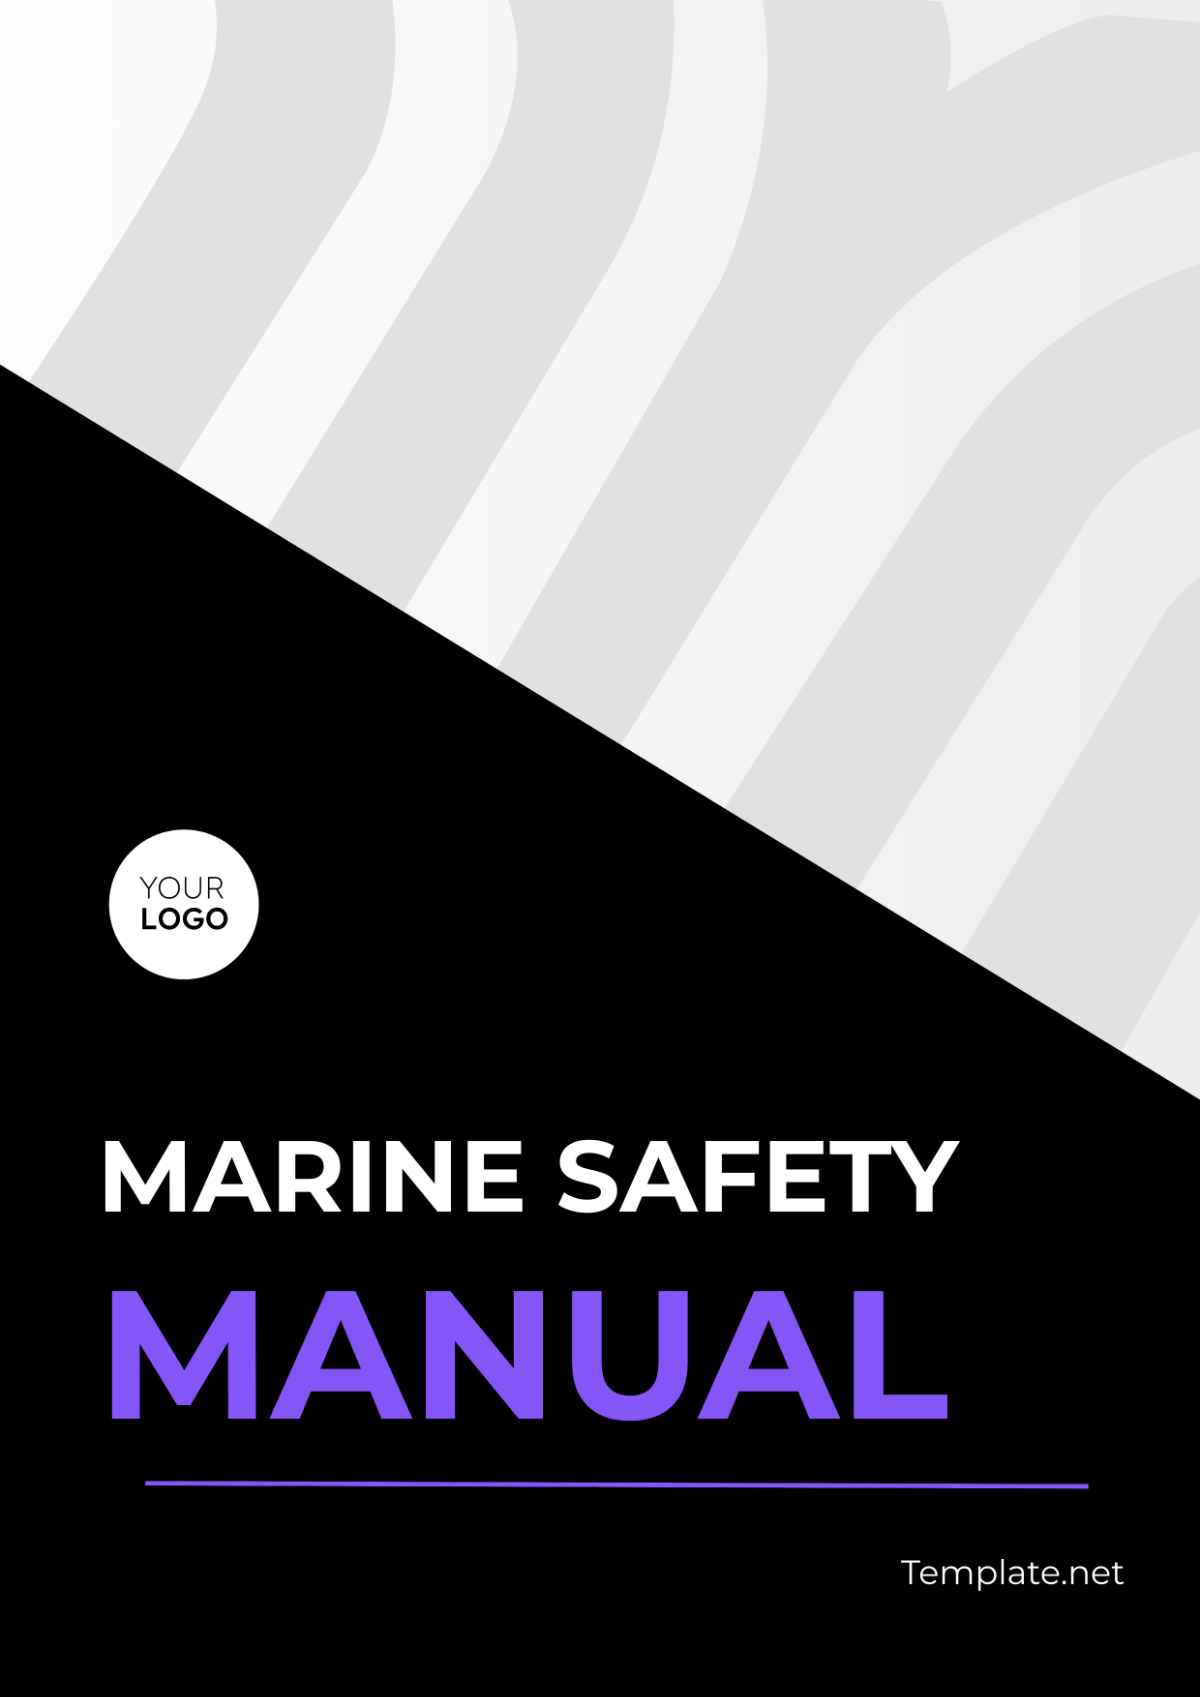 Marine Safety Manual Template